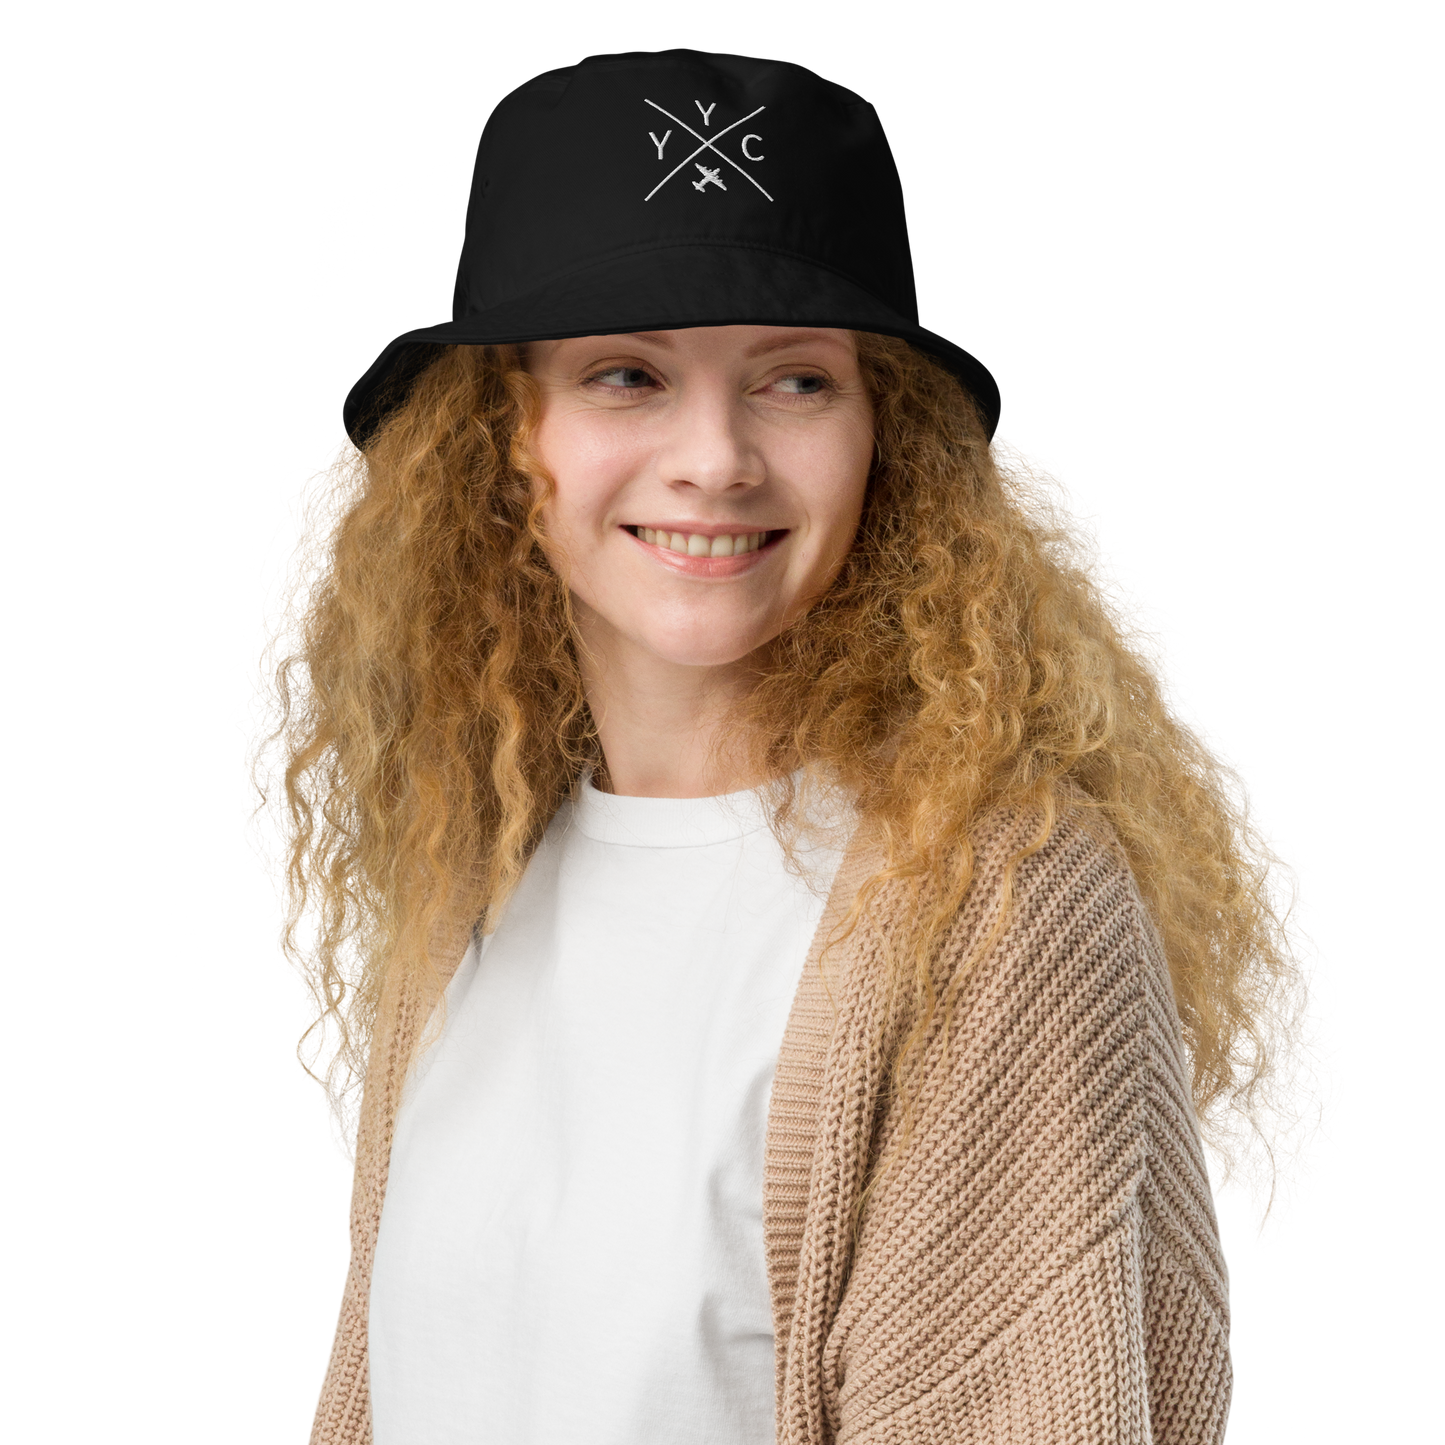 YHM Designs - YYC Calgary Organic Cotton Bucket Hat - Crossed-X Design with Airport Code and Vintage Propliner - White Embroidery - Image 04